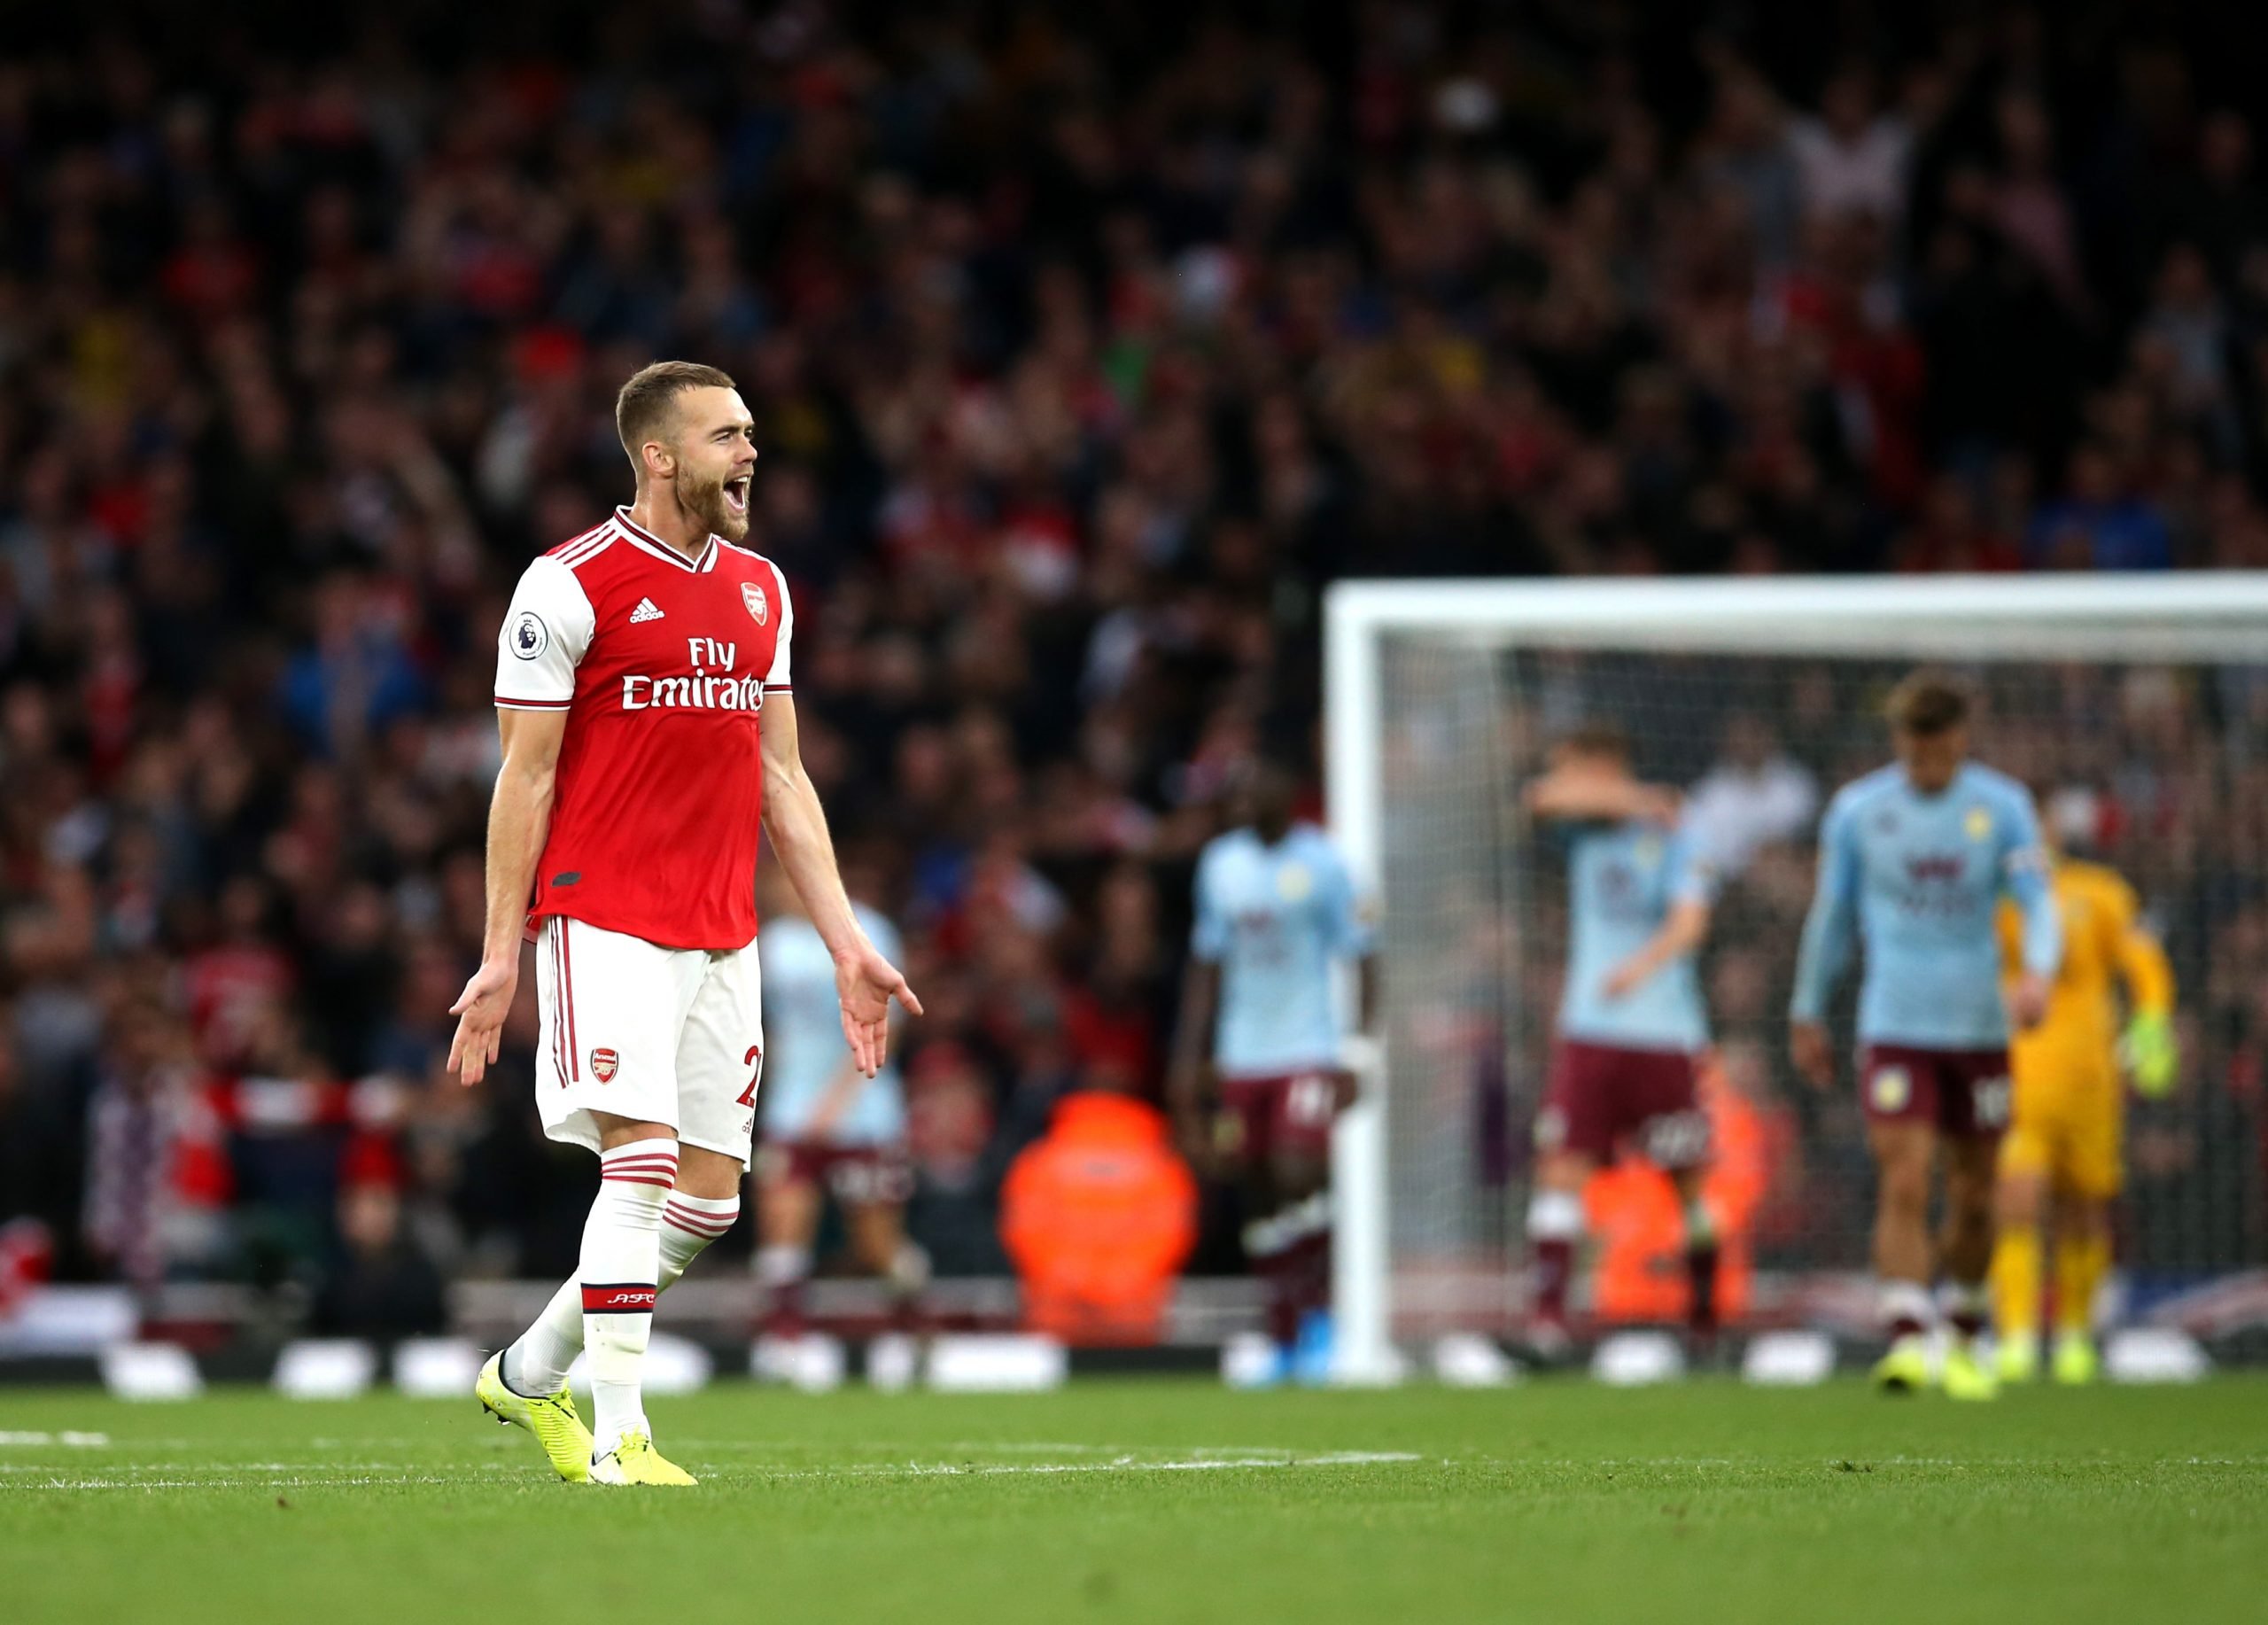 Leeds United are among clubs interested in Calum Chambers - A good option?